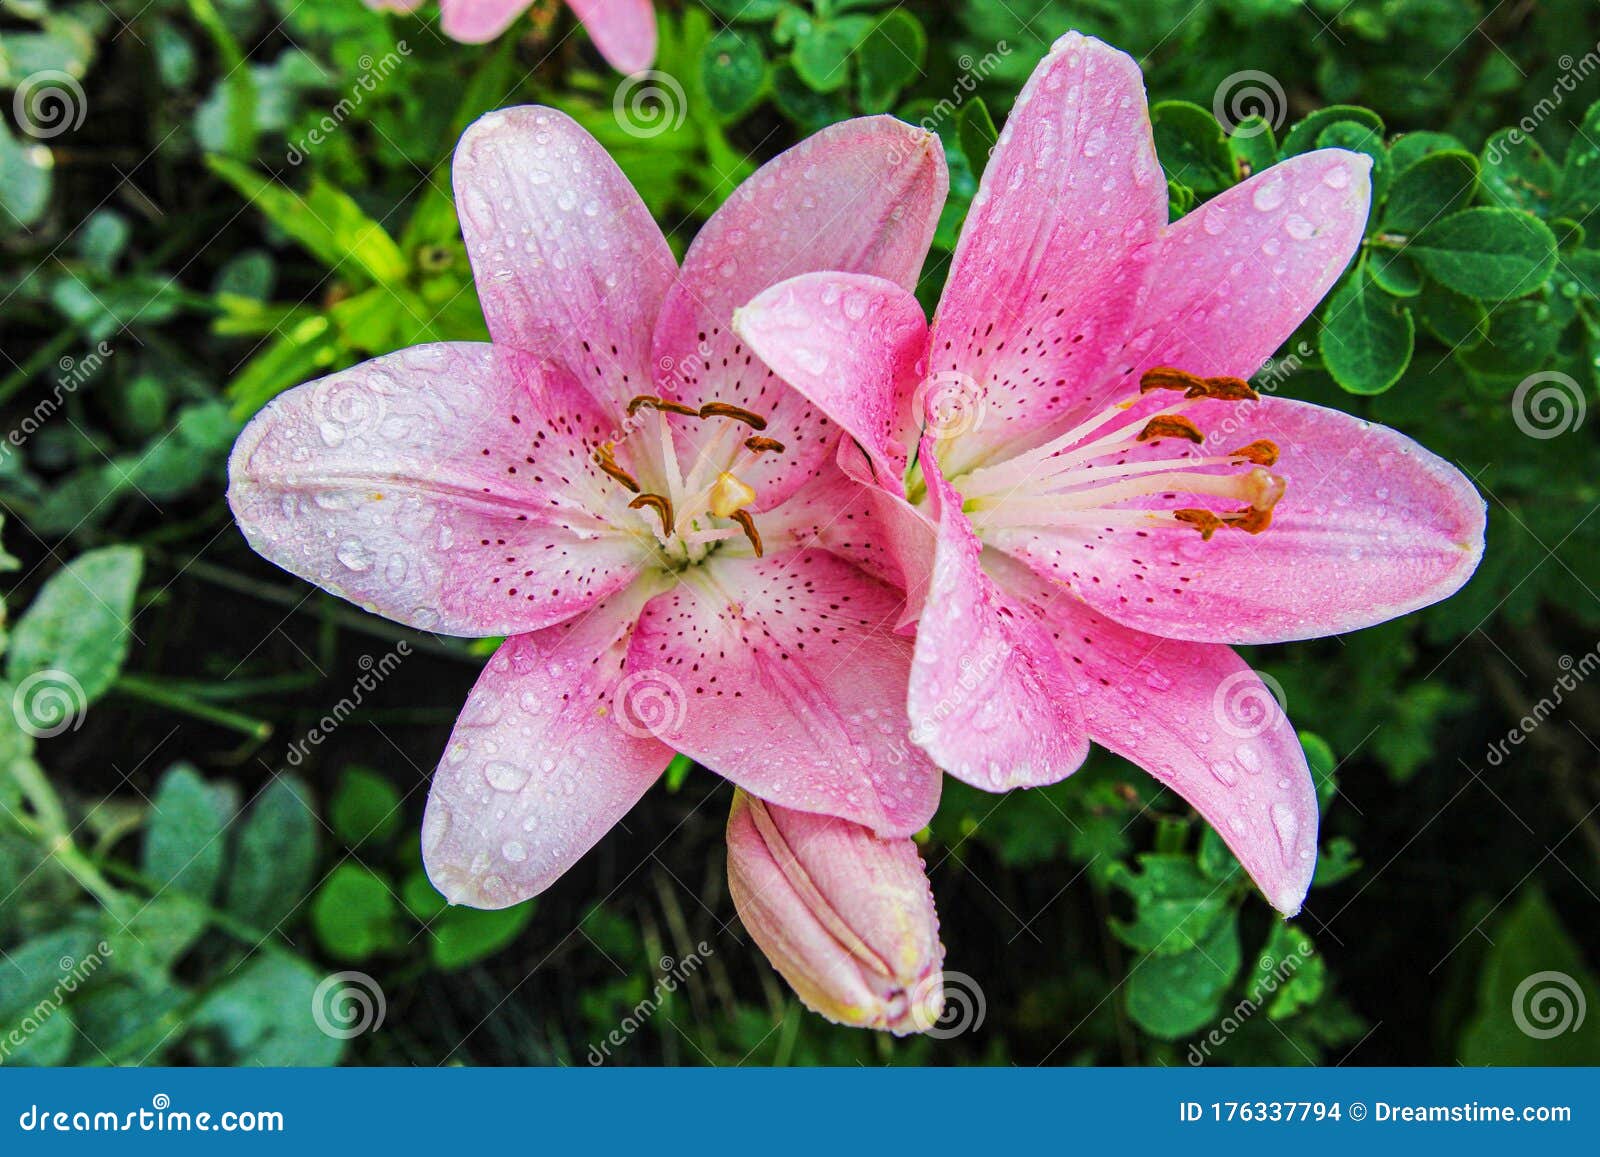 Colorful Lilies with Green Leaves. Beauty of Nature. Summer Flowers ...